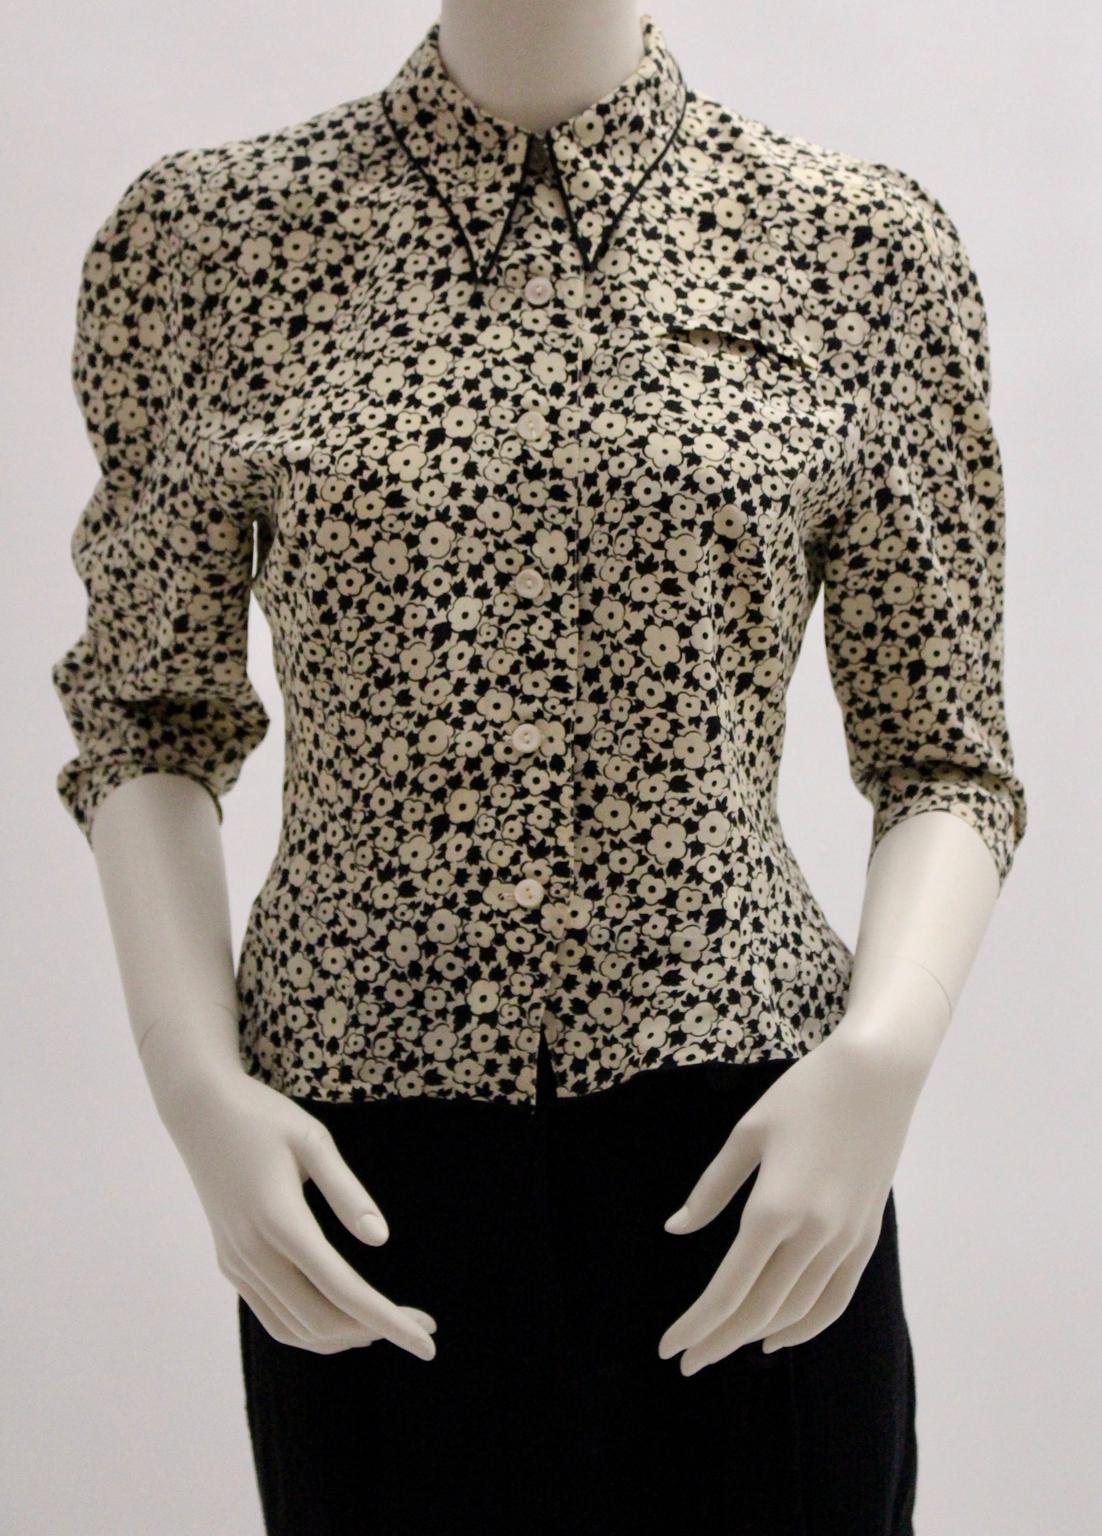 Lolita Lempicka Vintage Silk Blouse with Flower Allover Print  1980s In Good Condition For Sale In Vienna, AT